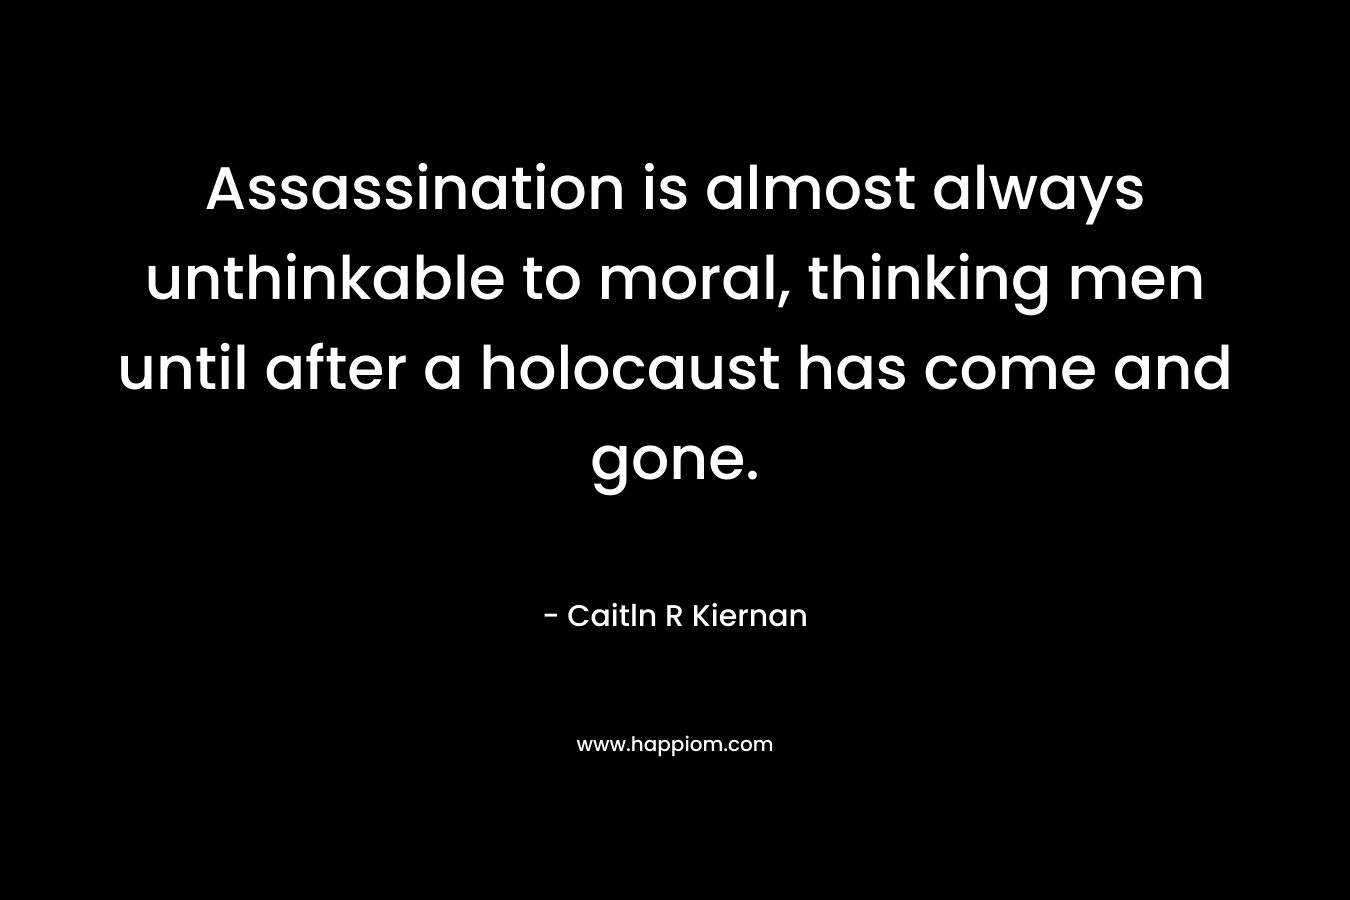 Assassination is almost always unthinkable to moral, thinking men until after a holocaust has come and gone. – Caitln R Kiernan